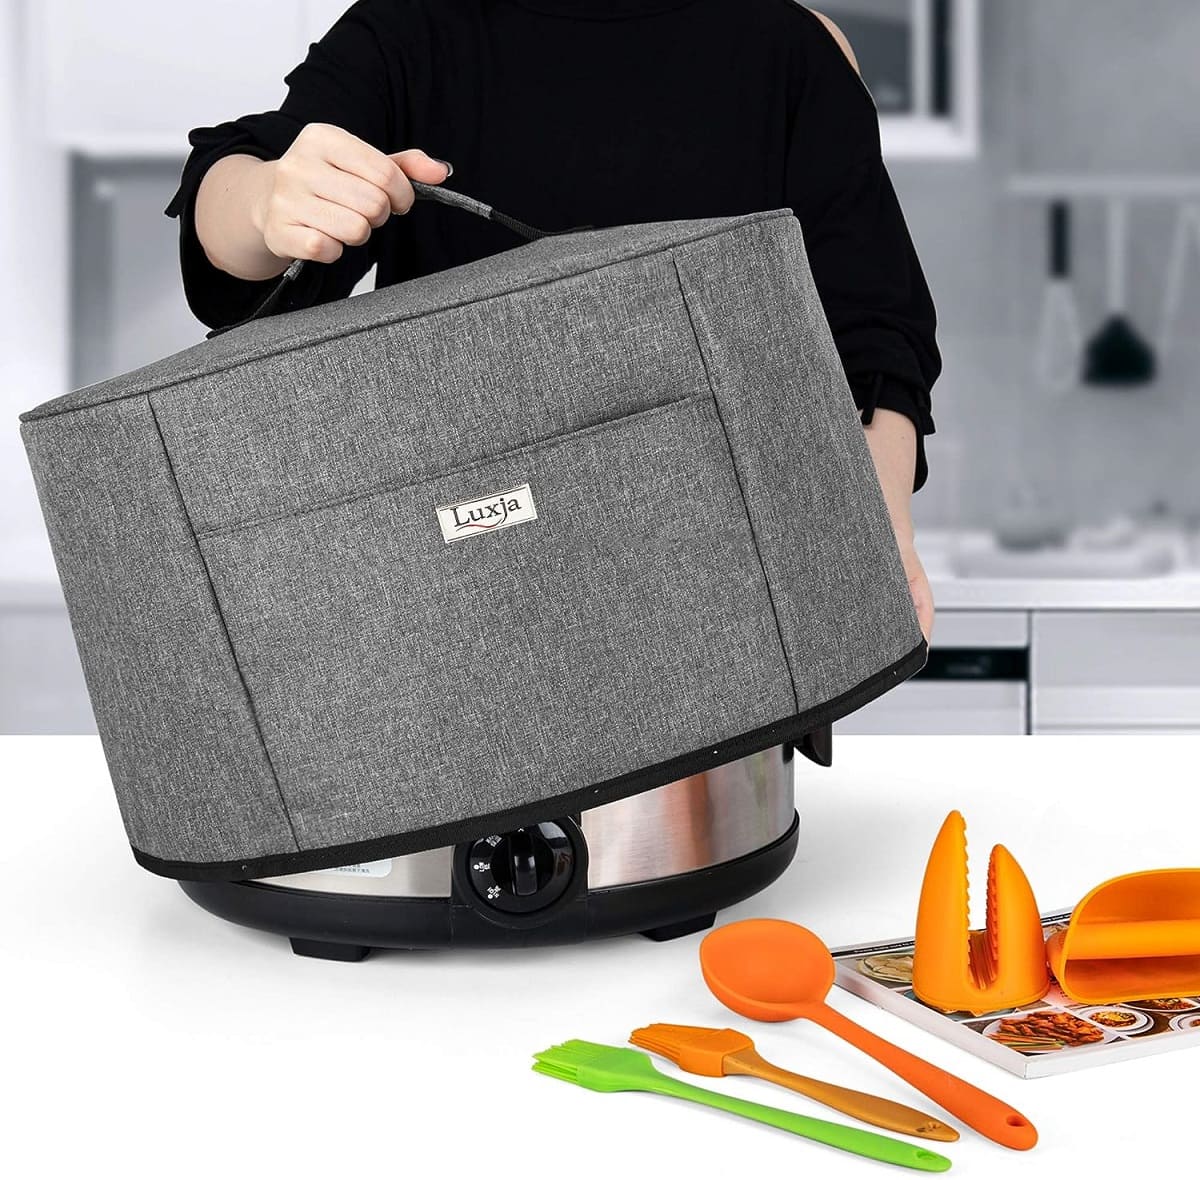 HOMEST 2 Compartments Carry Bag for 6 Quart Instant Pot, Pressure Cooker  Travel Tote Bag Have Accessory Pockets for Spoon, Measuring Cup, Steam  Rack